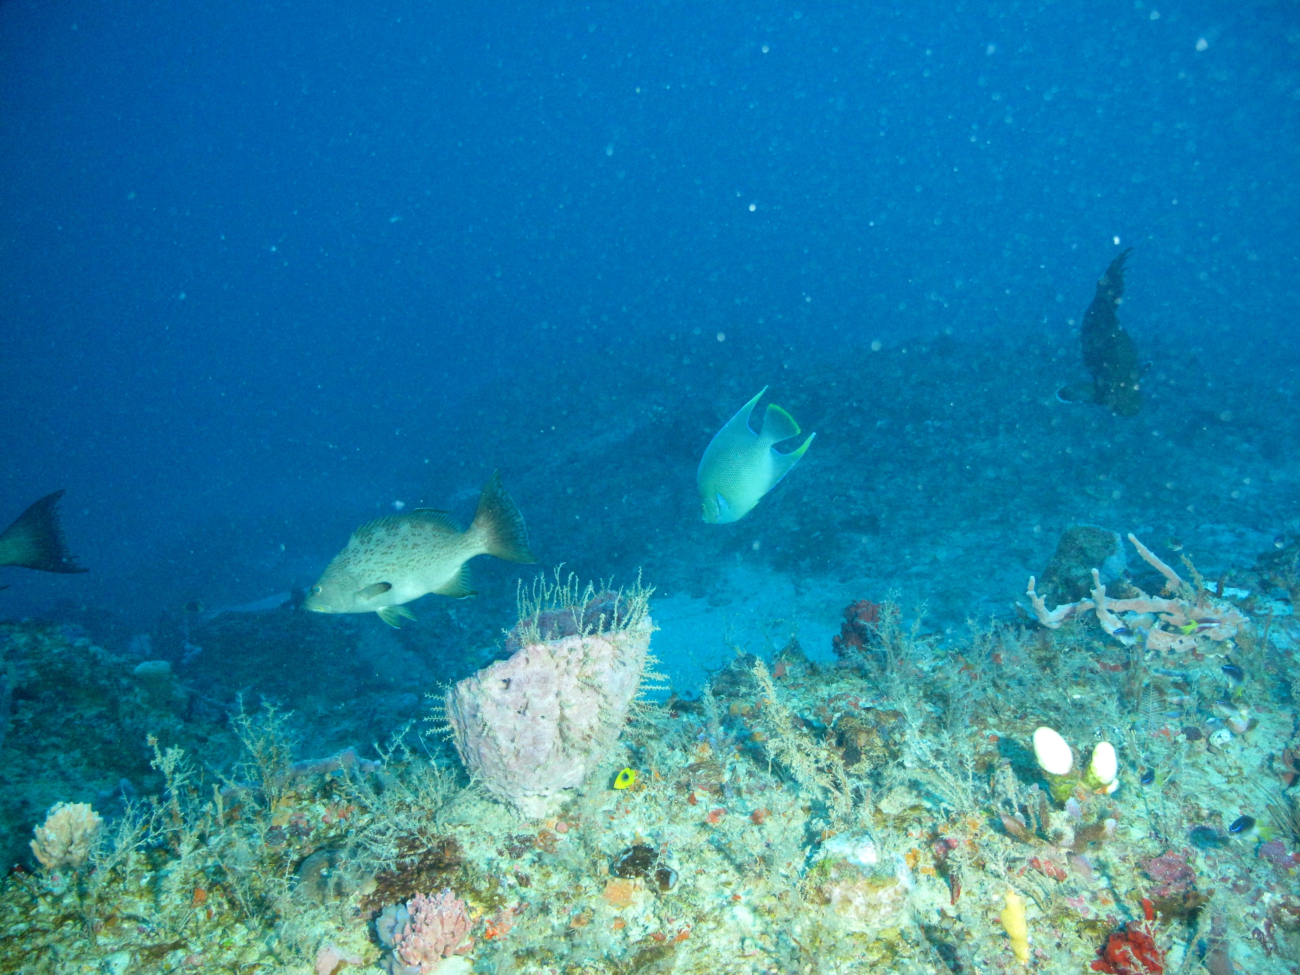 Scamp grouper and a blue angelfish